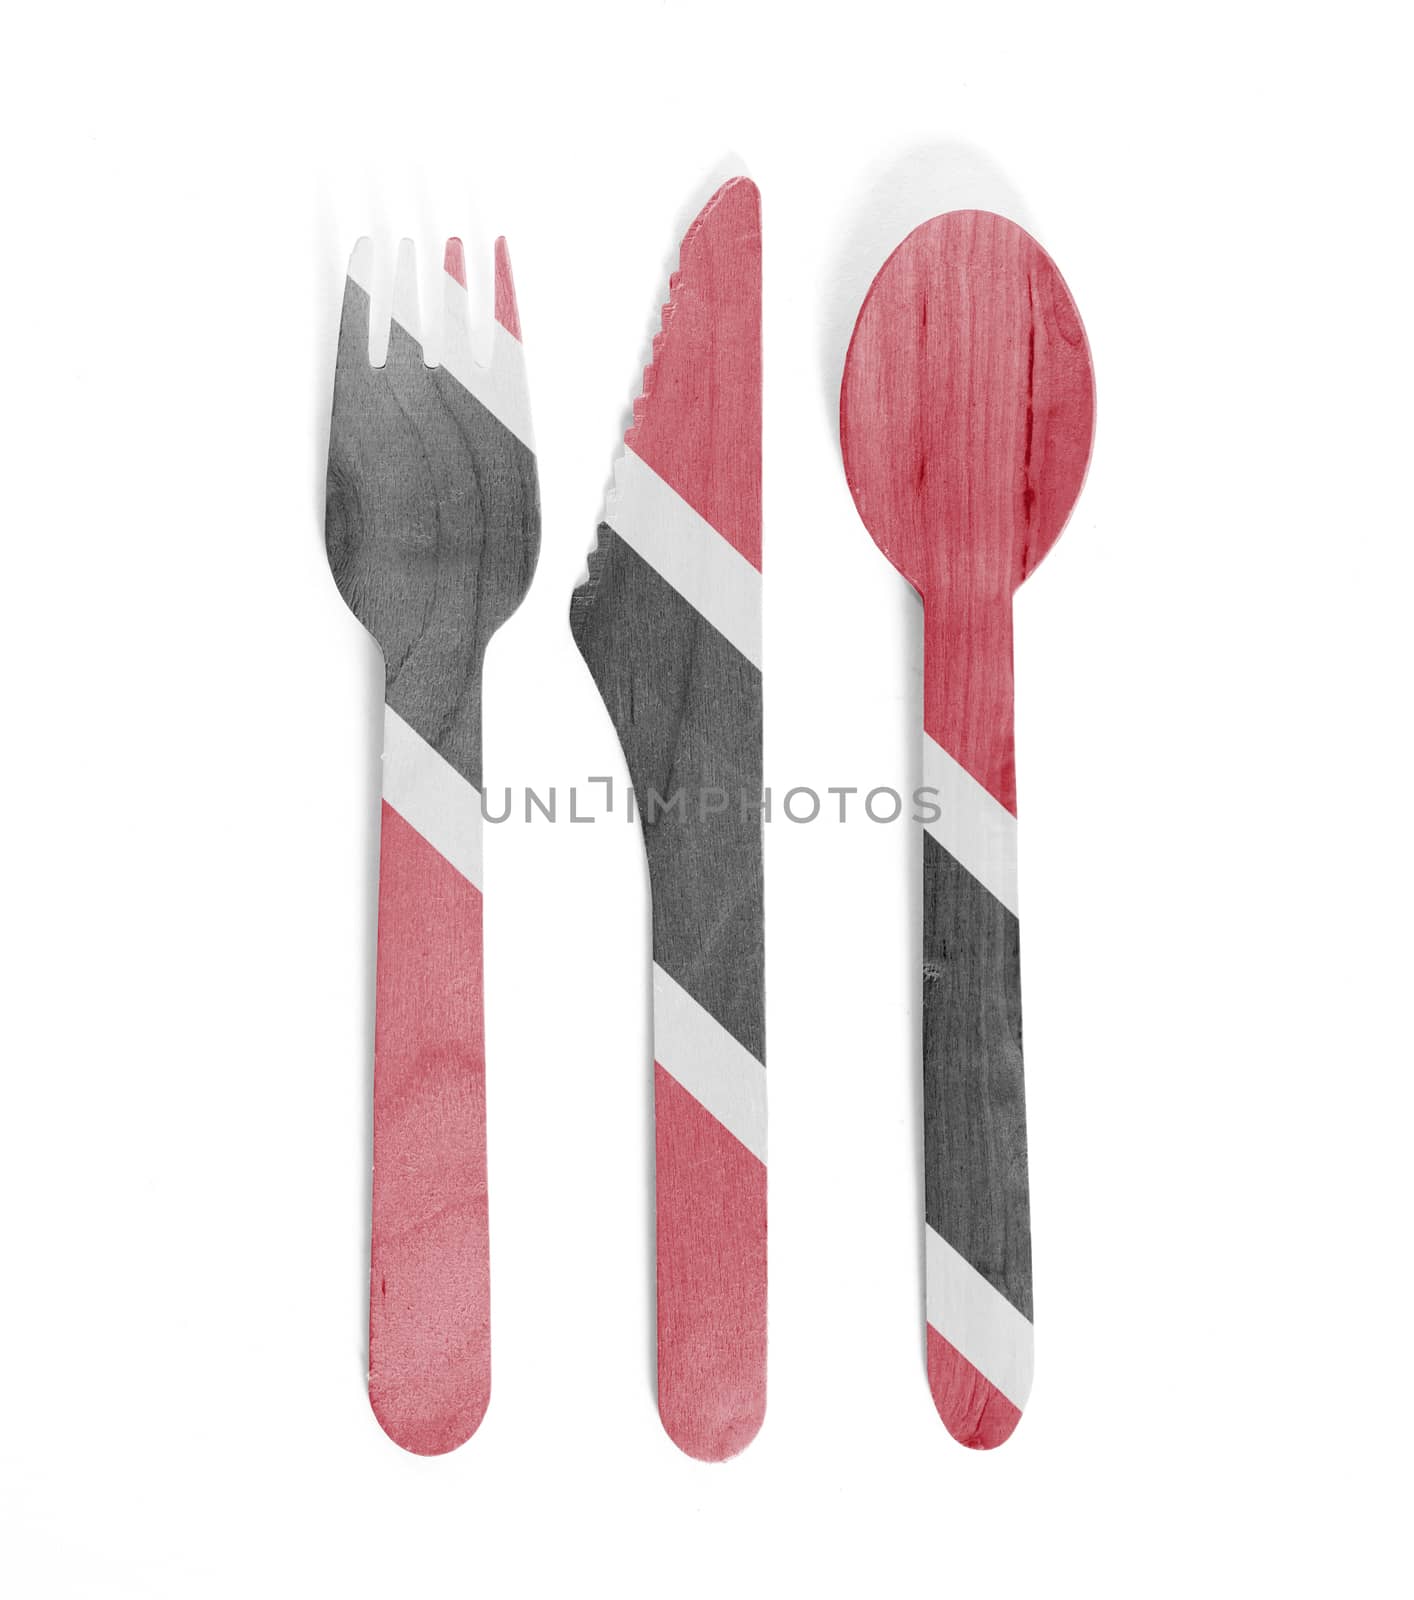 Eco friendly wooden cutlery - Plastic free concept - Isolated - Flag of Trinidad and Tobago